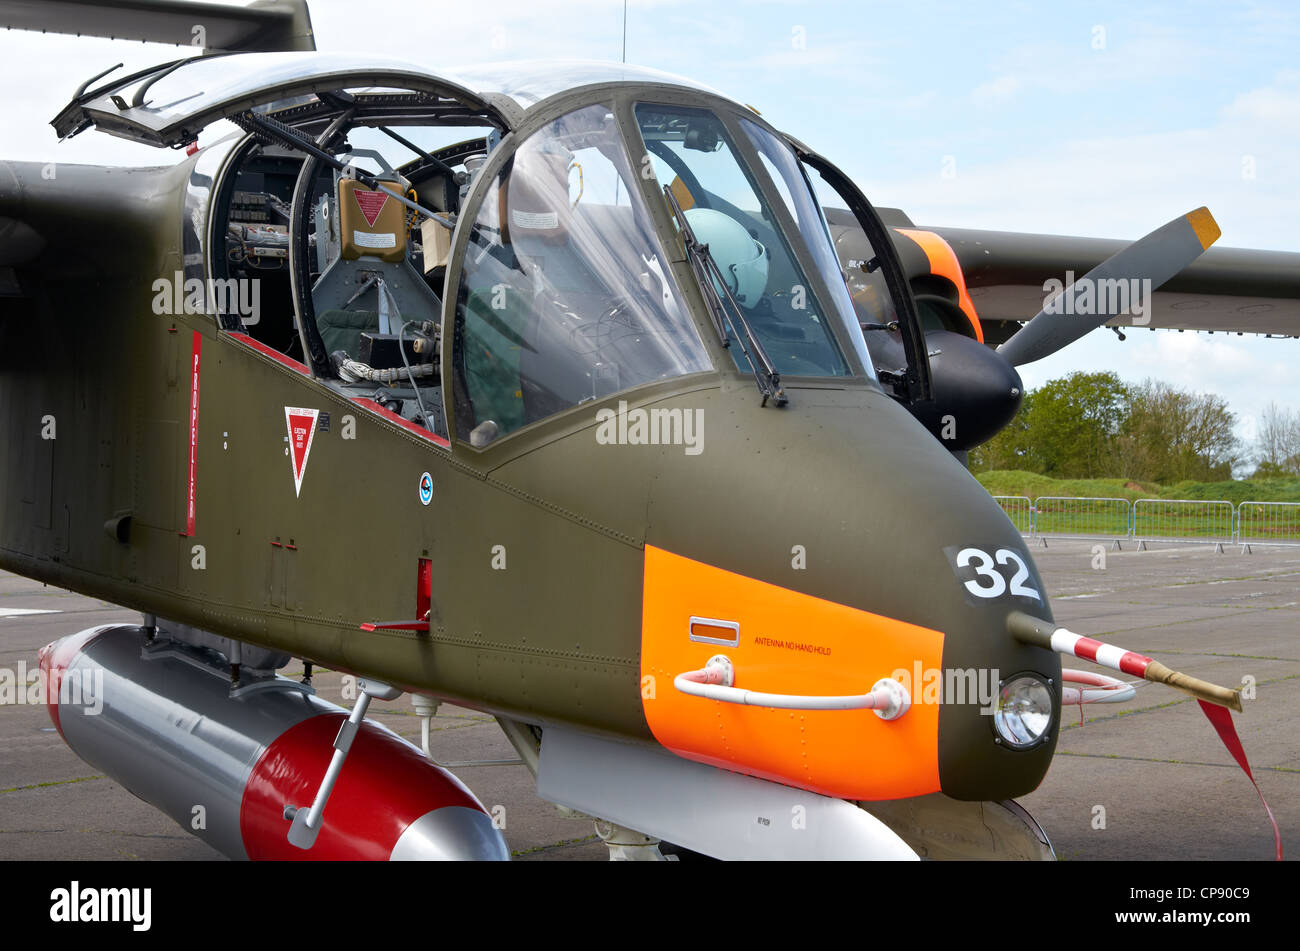 North American Aviation Rockwell OV-10 Bronco turboprop light attack and observation aircraft at Abingdon Airshow 2012 Stock Photo